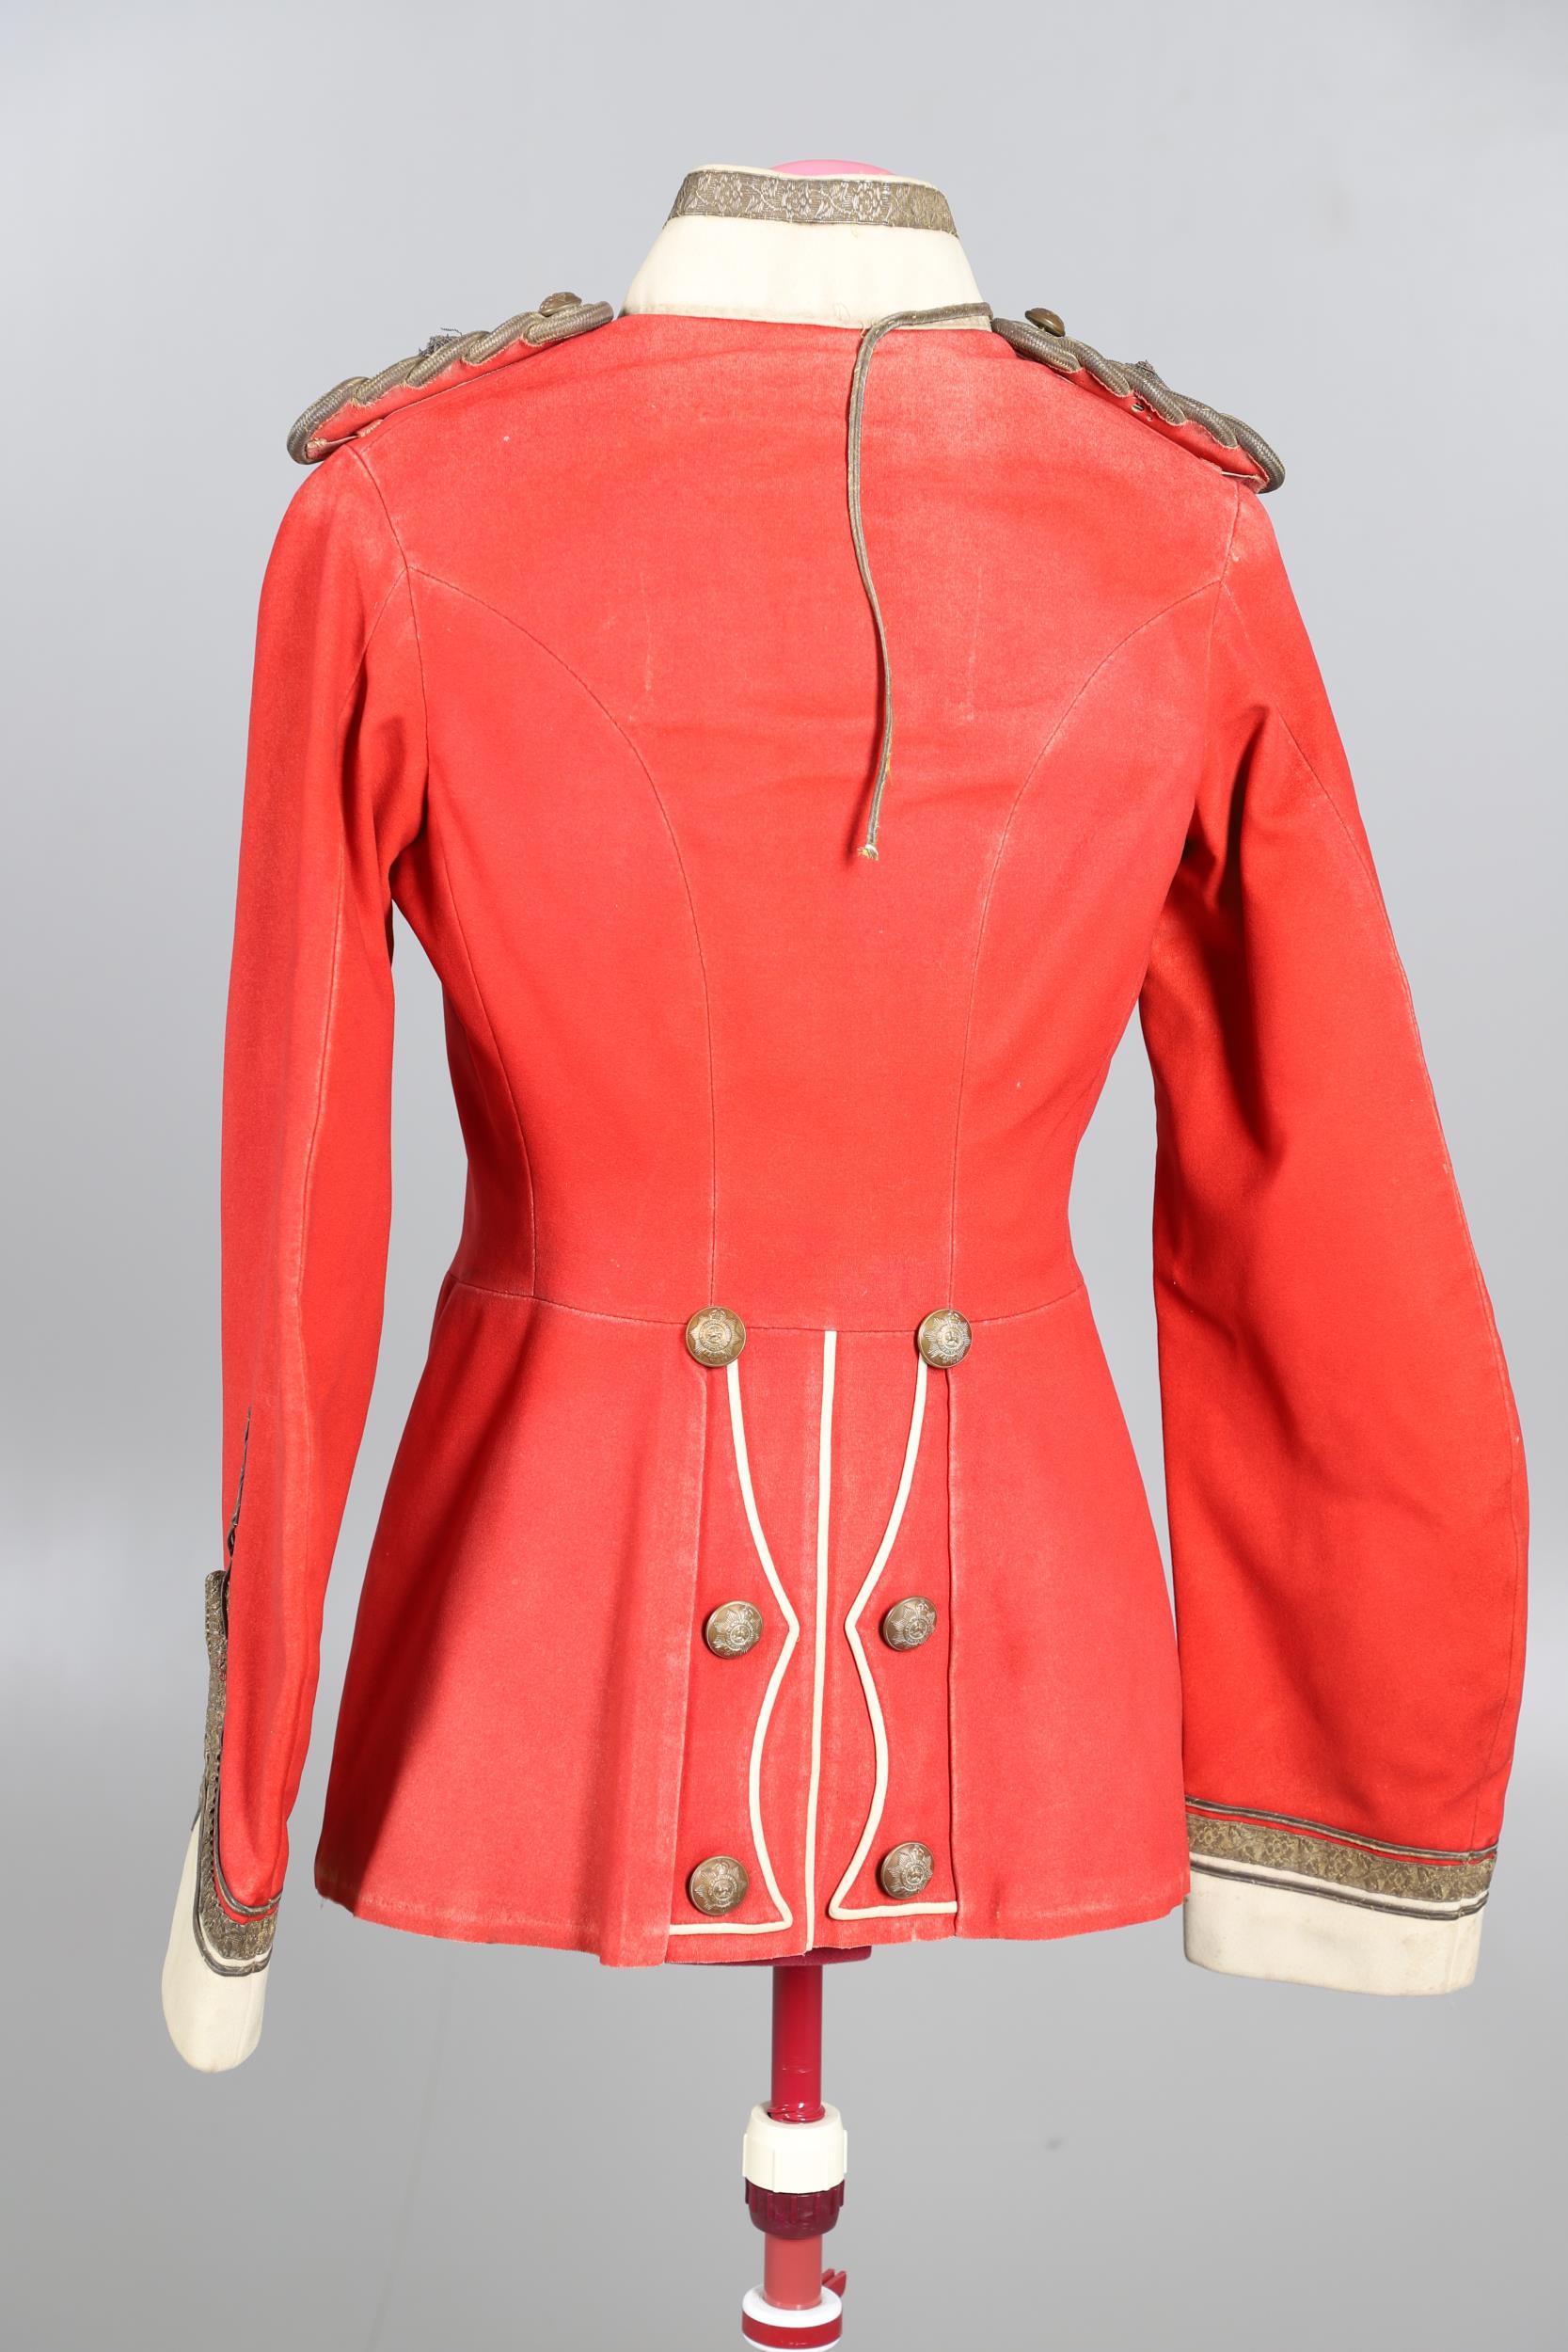 AN EARLY 20TH CENTURY SCARLET TUNIC FOR THE WORCESTER REGIMENT. - Image 8 of 16